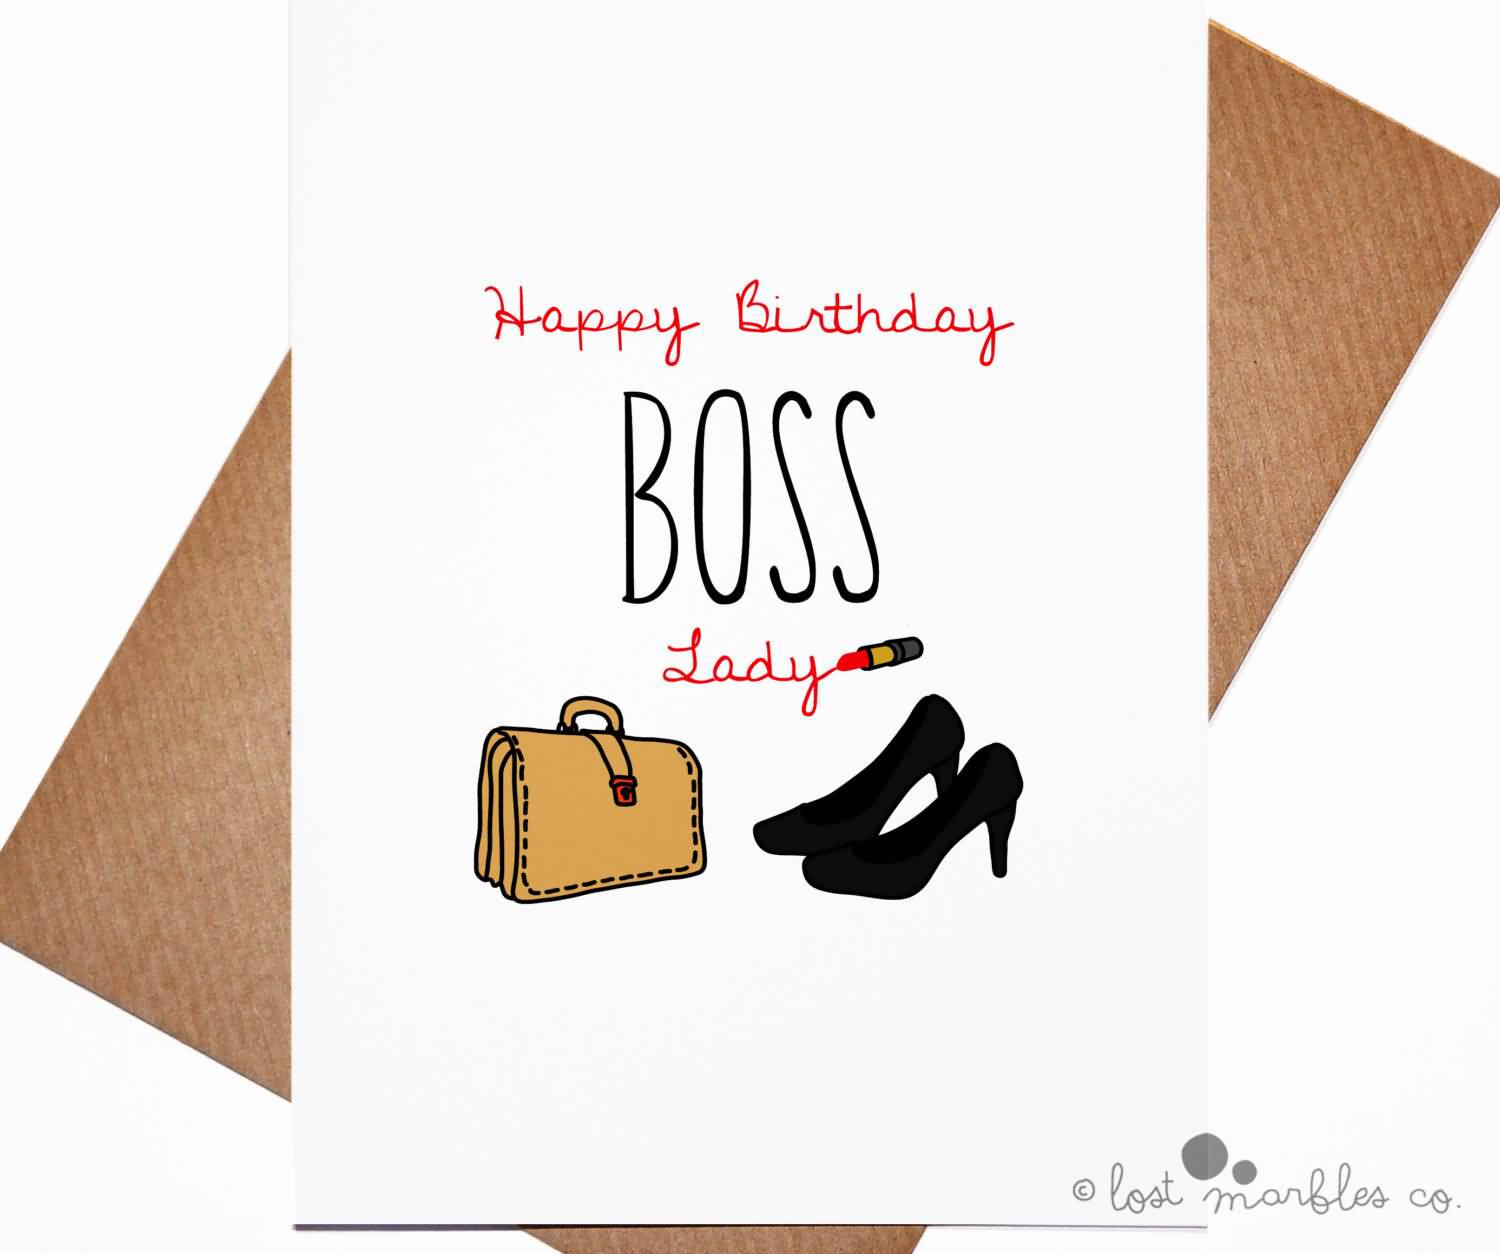 Funny Boss Birthday Cards
 45 Fabulous Happy Birthday Wishes For Boss Image Meme